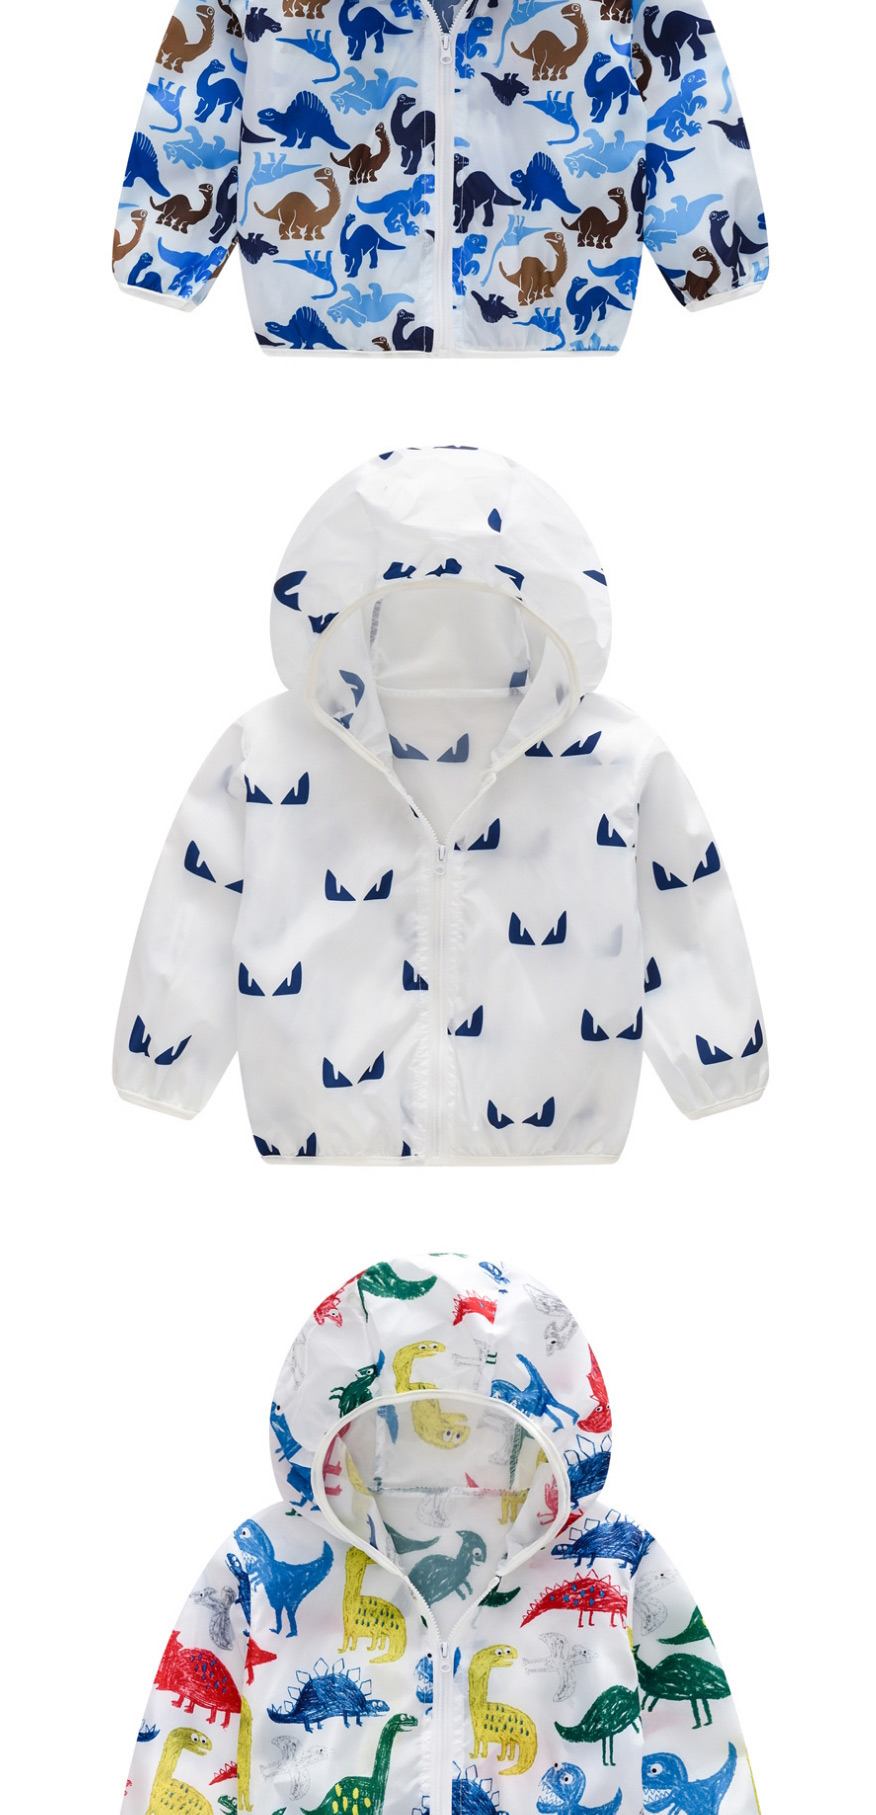 Fashion Rabbit Powder Hooded Outdoor Sun Protection Clothing,Kids Clothing